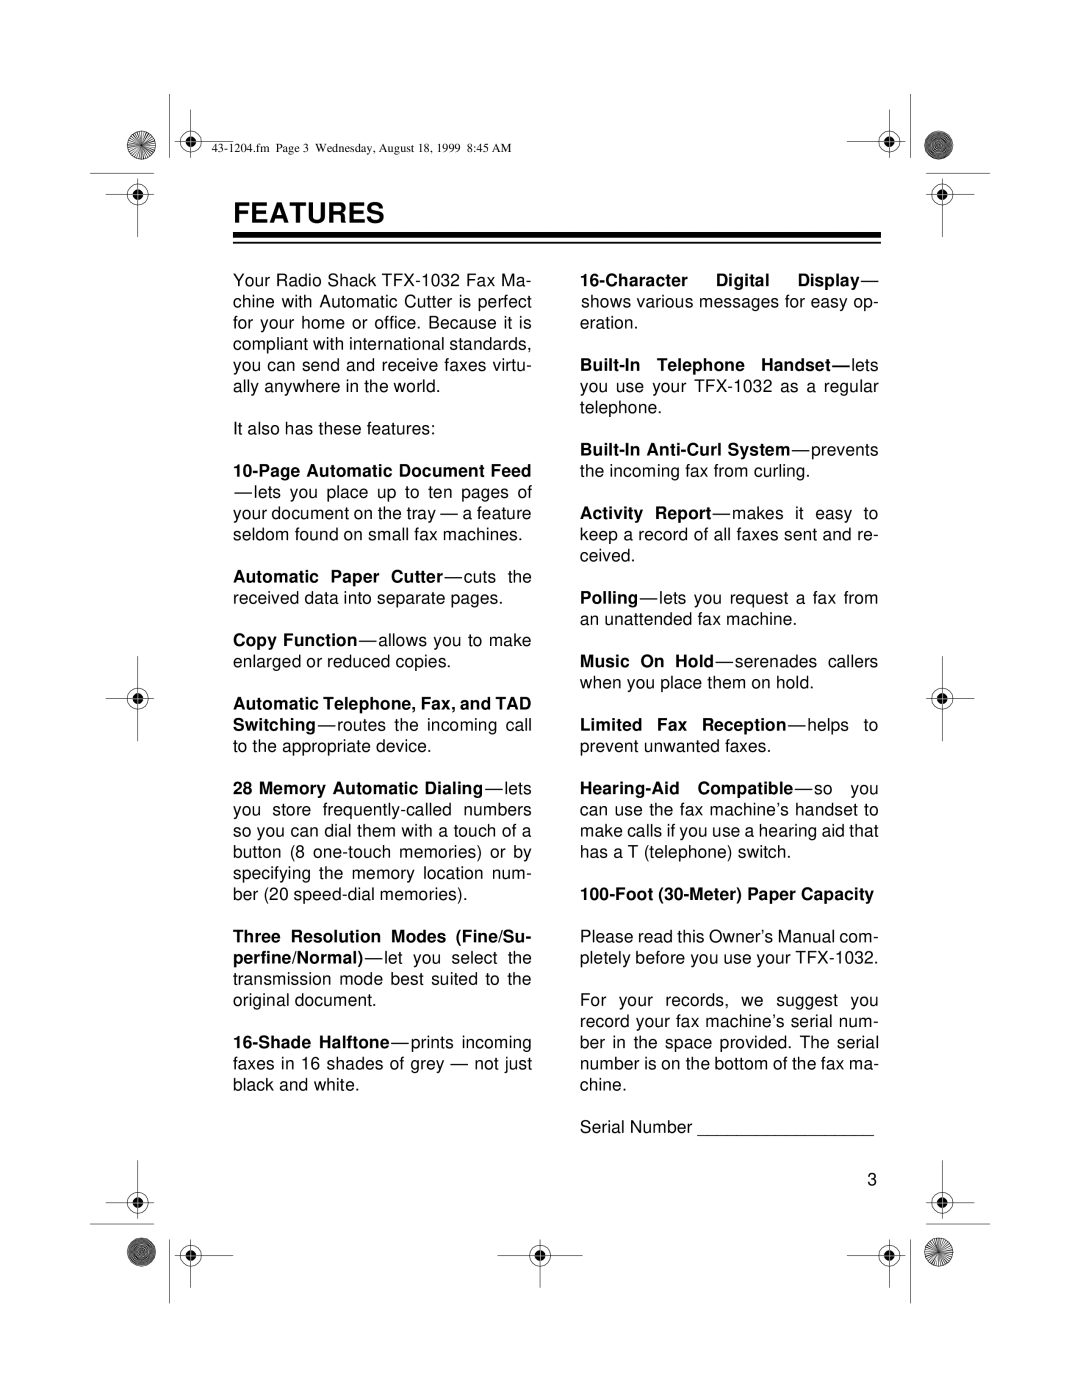 Radio Shack 43-1204 owner manual Features 